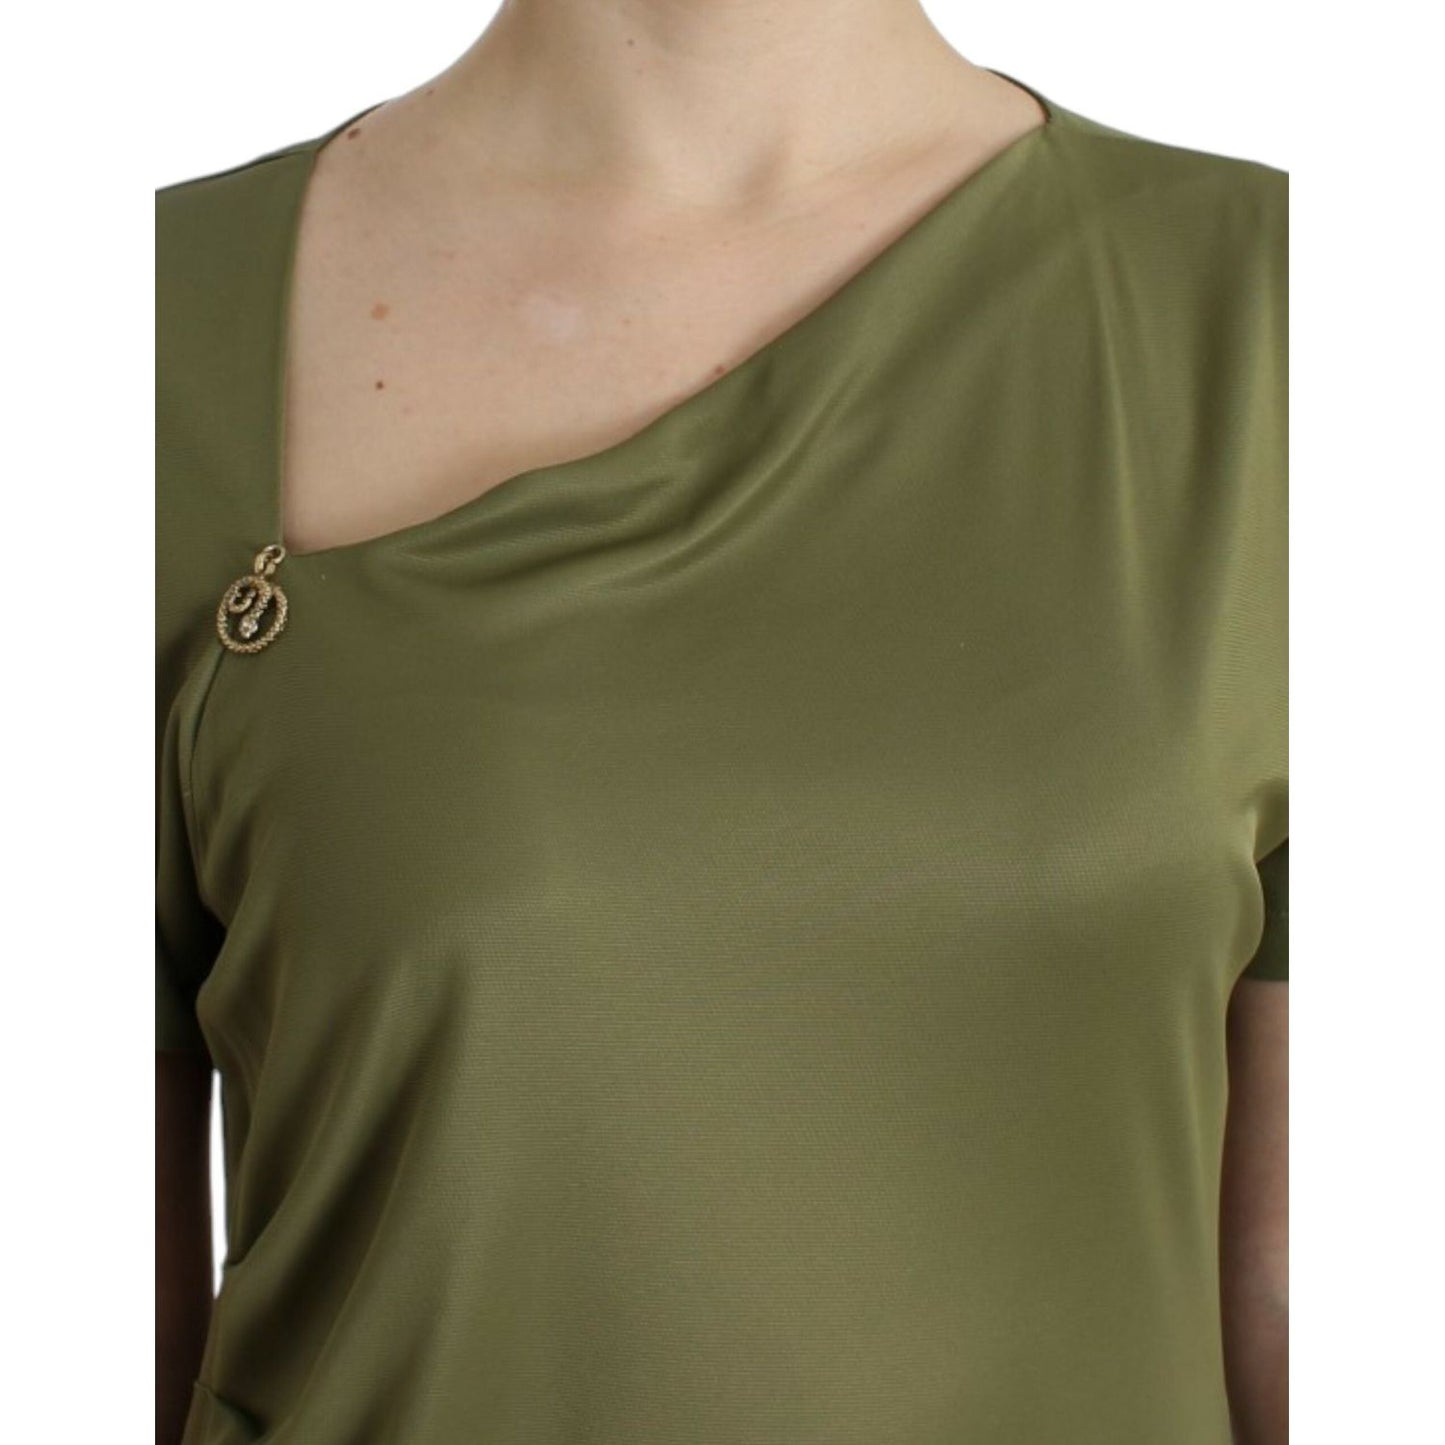 Cavalli Elegant Green Jersey Blouse with Gold Accents green-blouse-top